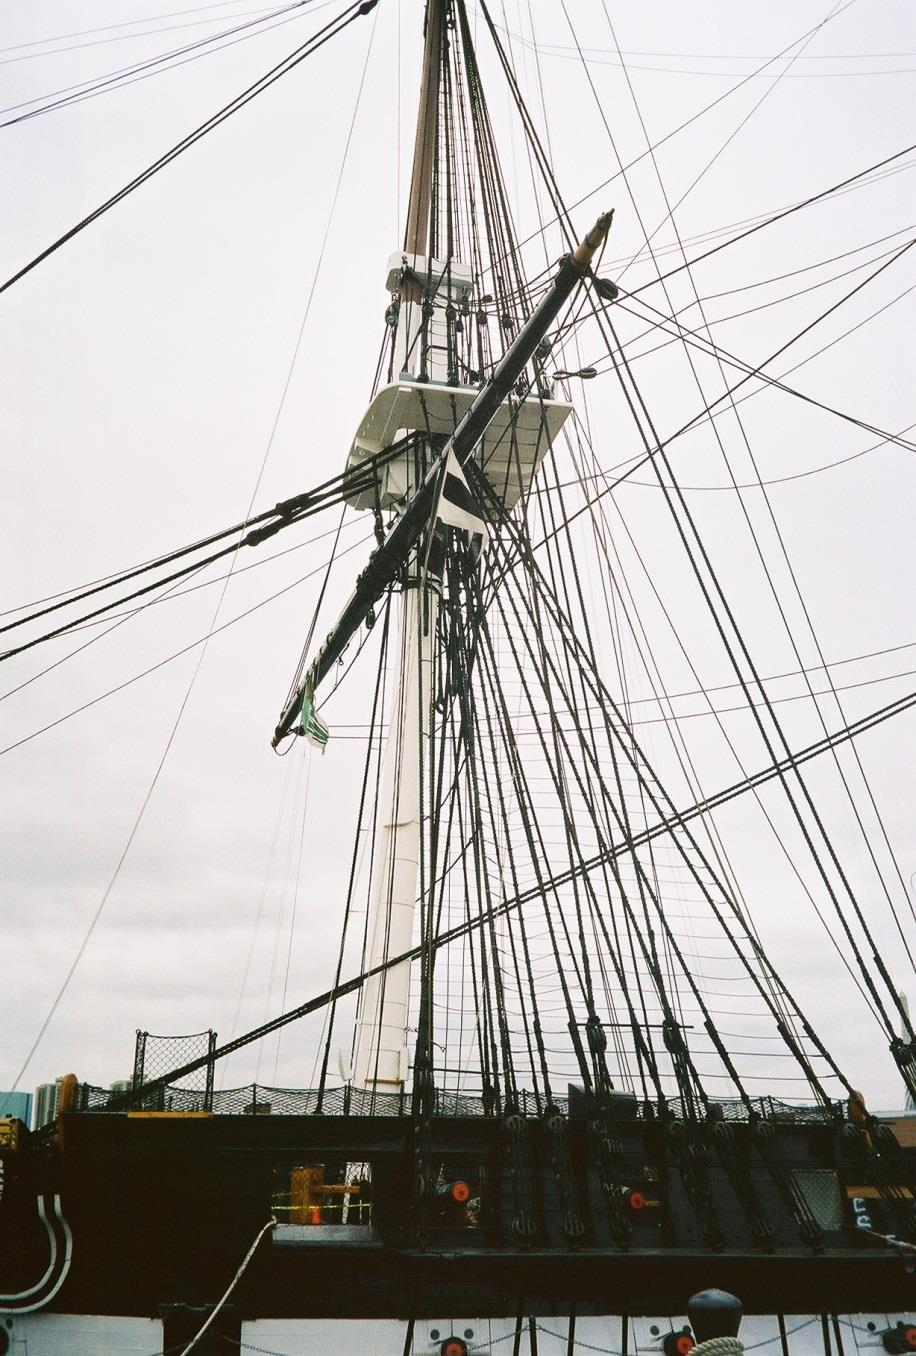 Flying Tops (Crow s Nest) The USS Constitution carried 55 marines Marines would often perform the role of sniper from the flying tops, also known as